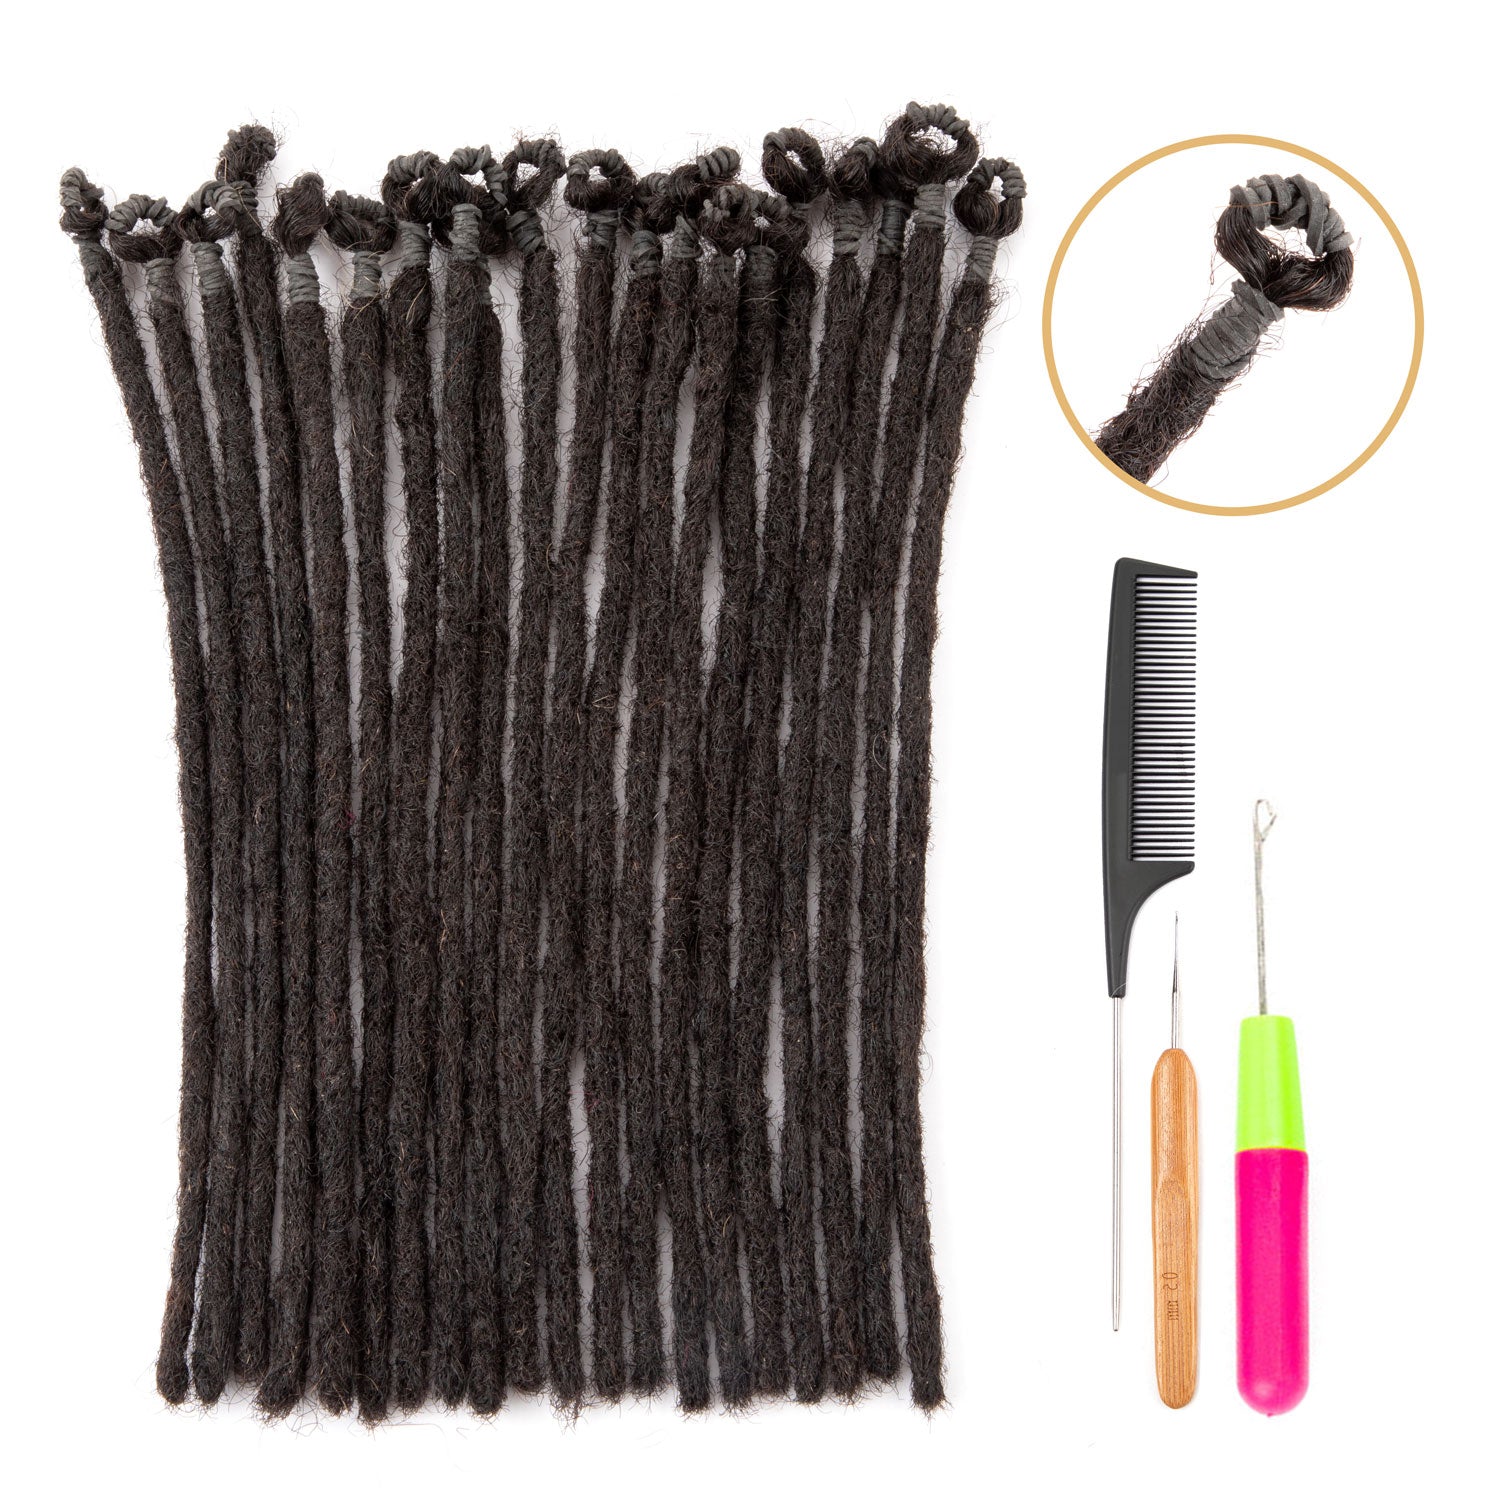 Pre-looped Top Dreadlocks Extensions Human Hair Permanent Dreads For Men and Women 0.4cm Thickness  (6-18 Inch)